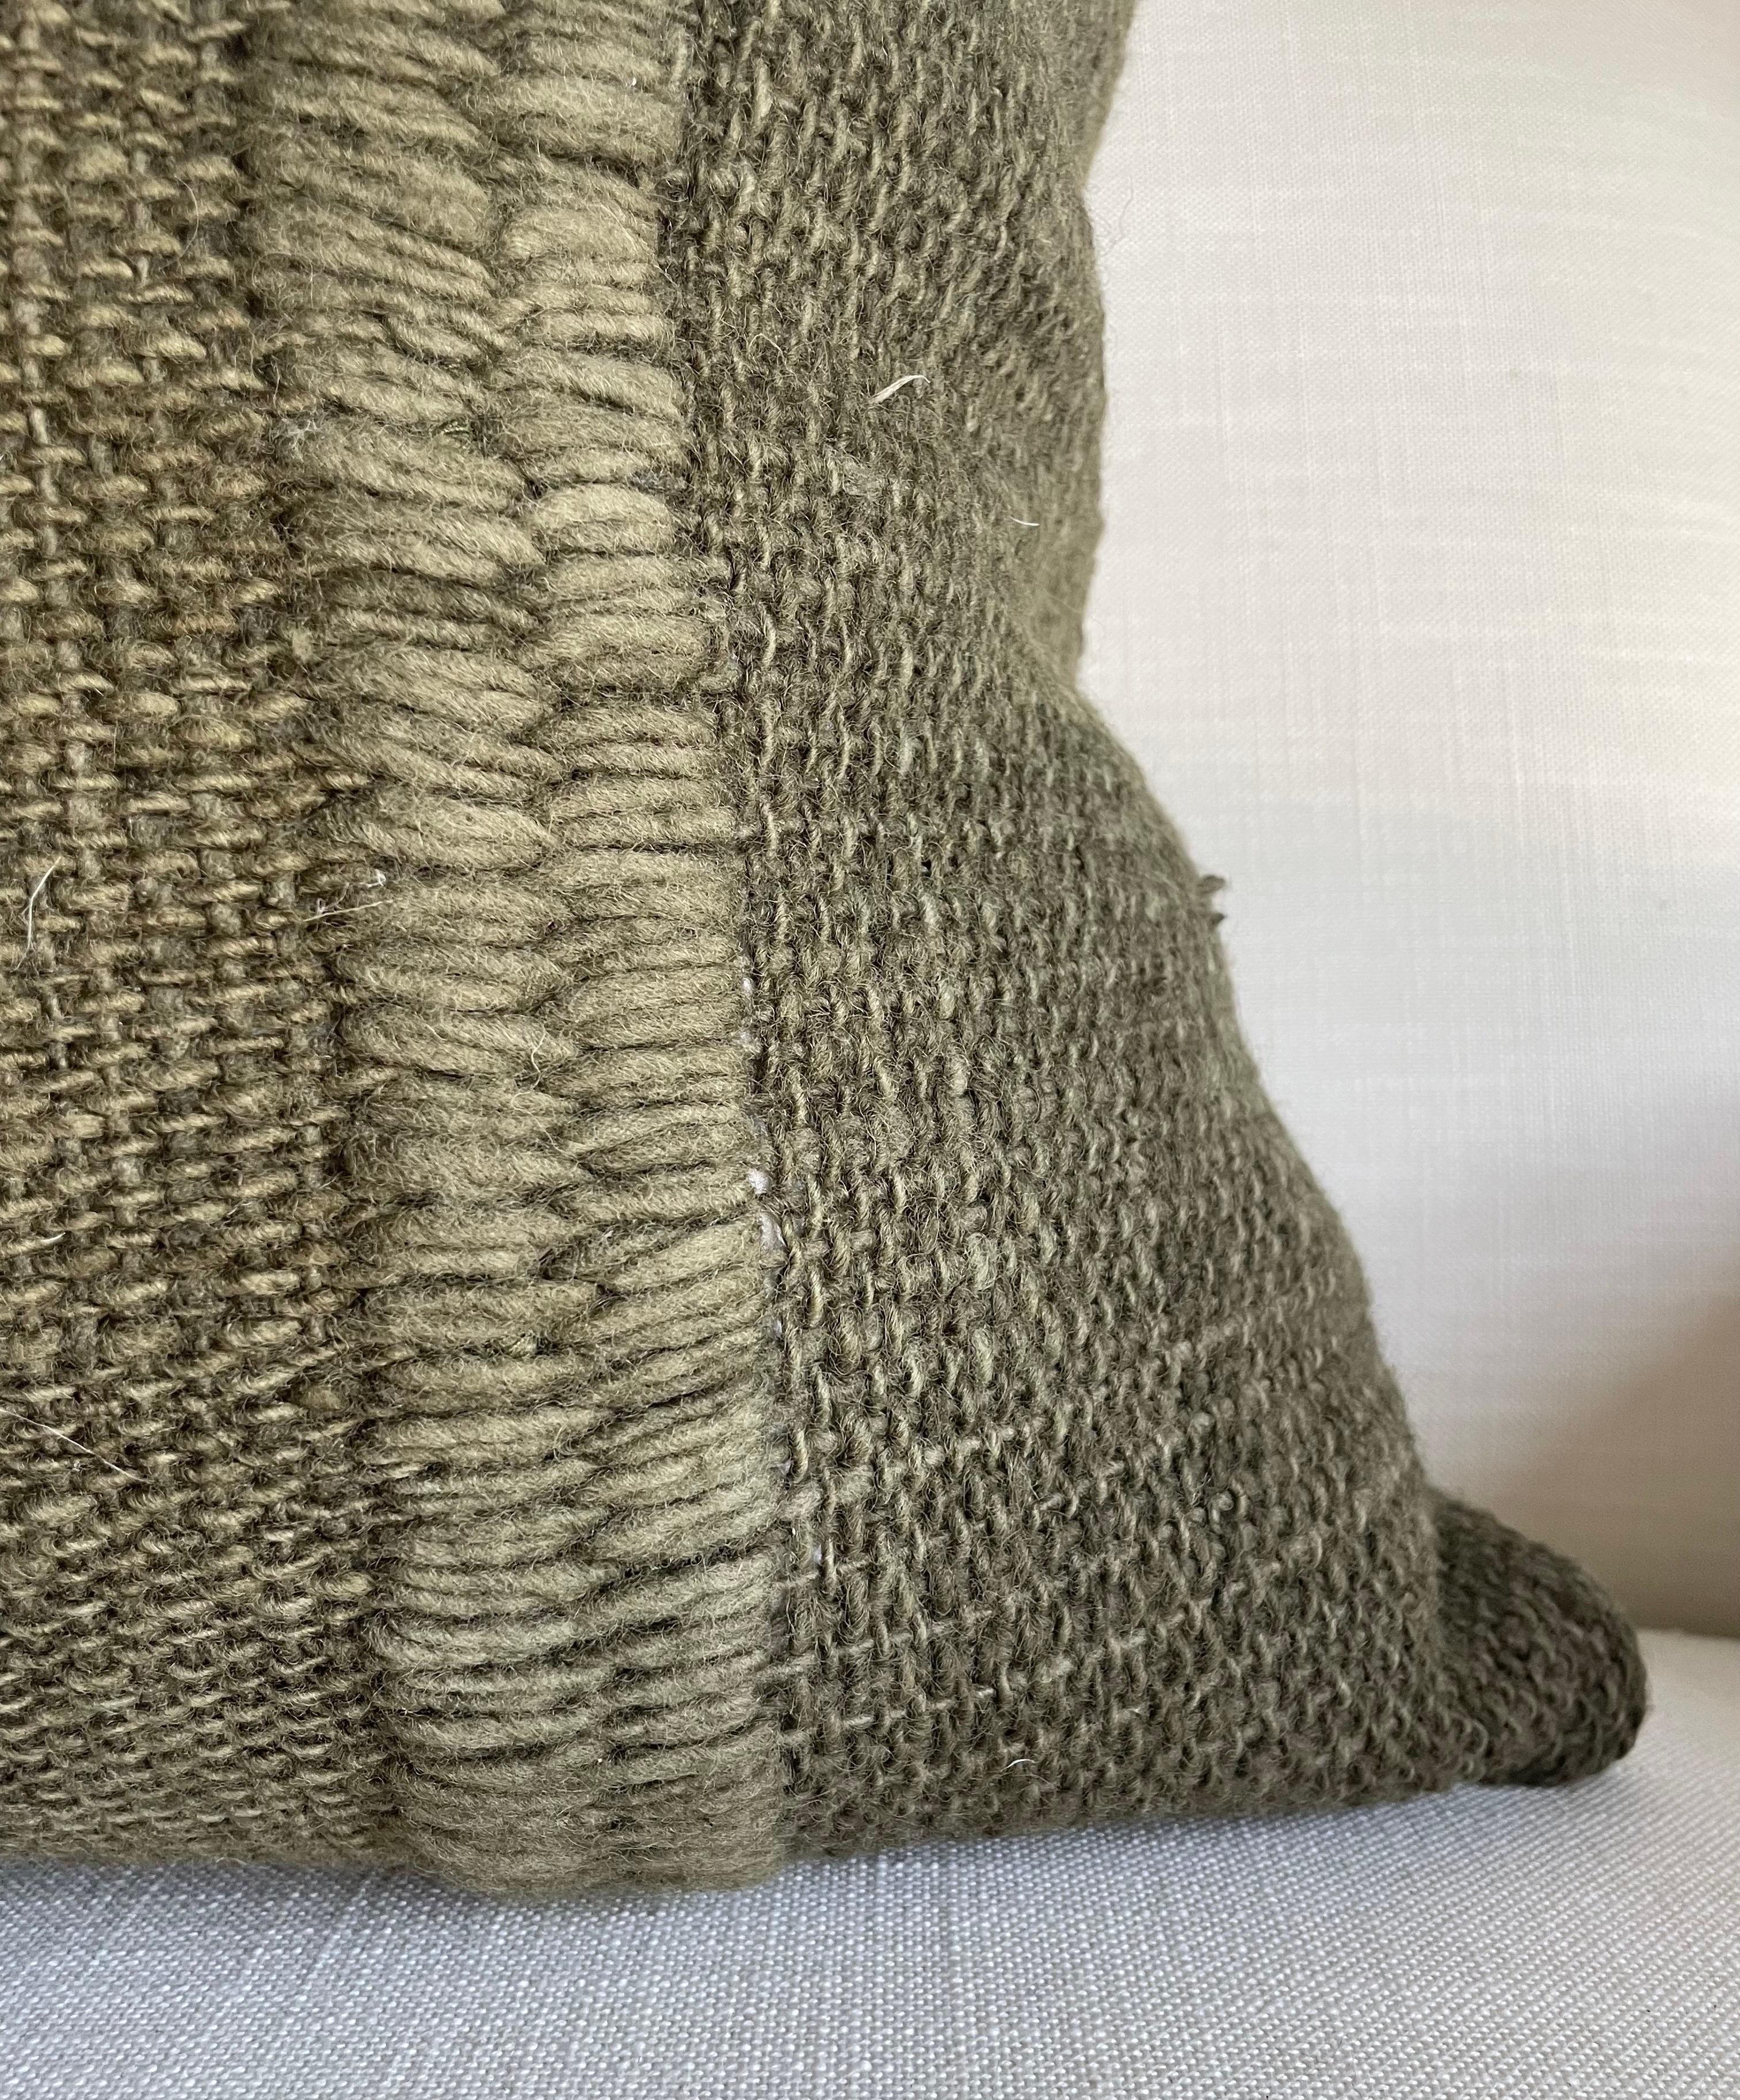 KARU Wool Pillow Cover
Size: 25” x 25”
Zipper Closure, patchwork style.
A soft thick nubby textural pillow. Hand Stitching give it a beautiful detailed patchwork style.
Insert not included.
